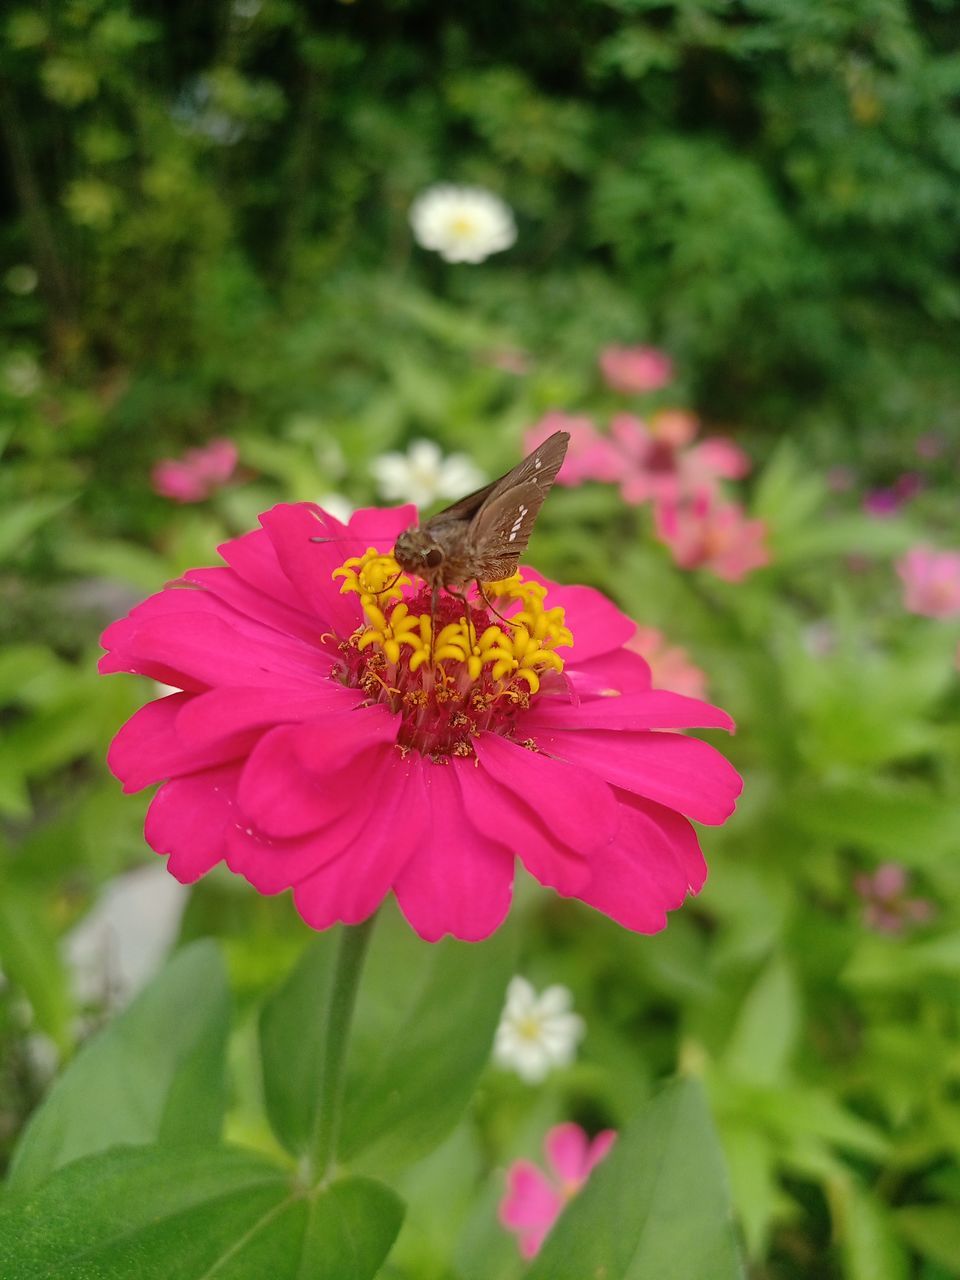 flower, flowering plant, plant, beauty in nature, freshness, petal, fragility, flower head, pink, close-up, animal wildlife, animal themes, animal, insect, growth, nature, wildlife, one animal, inflorescence, no people, pollination, focus on foreground, garden cosmos, pollen, zinnia, day, outdoors, wildflower, butterfly, macro photography, green